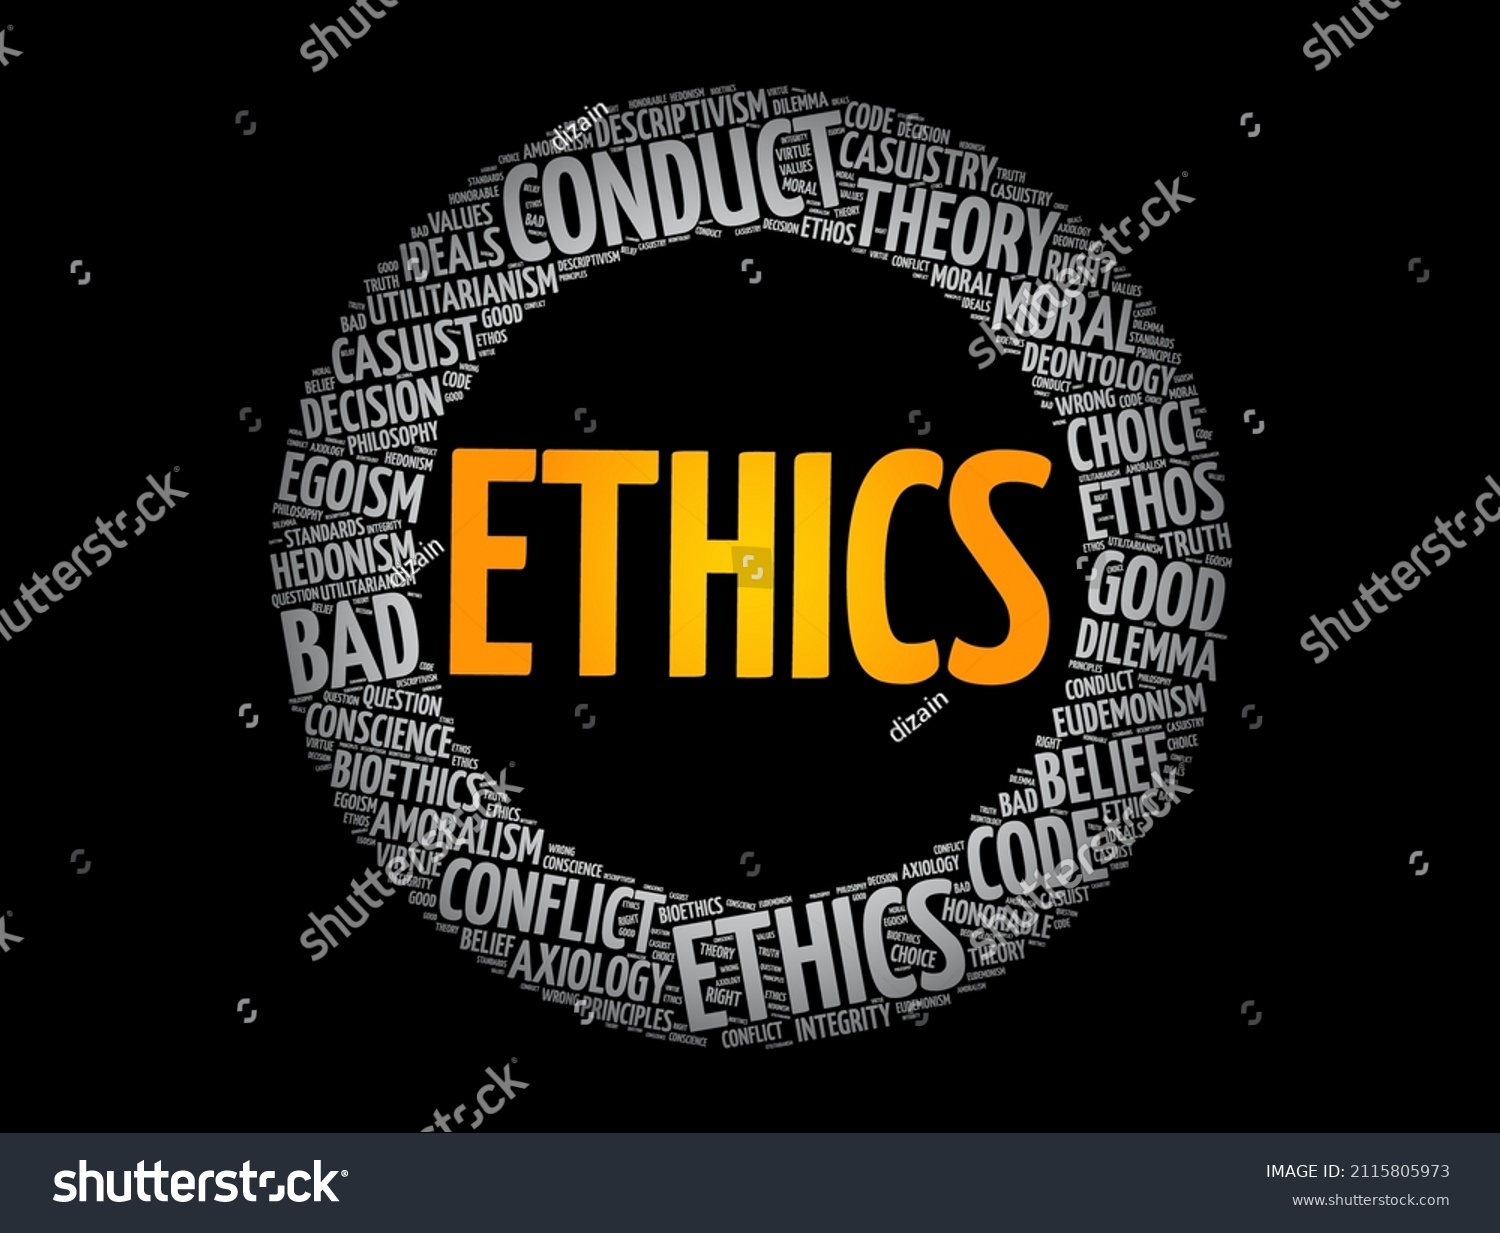 SVG of Ethics - branch of philosophy that involves systematizing and recommending concepts of right and wrong behavior, word cloud concept background svg